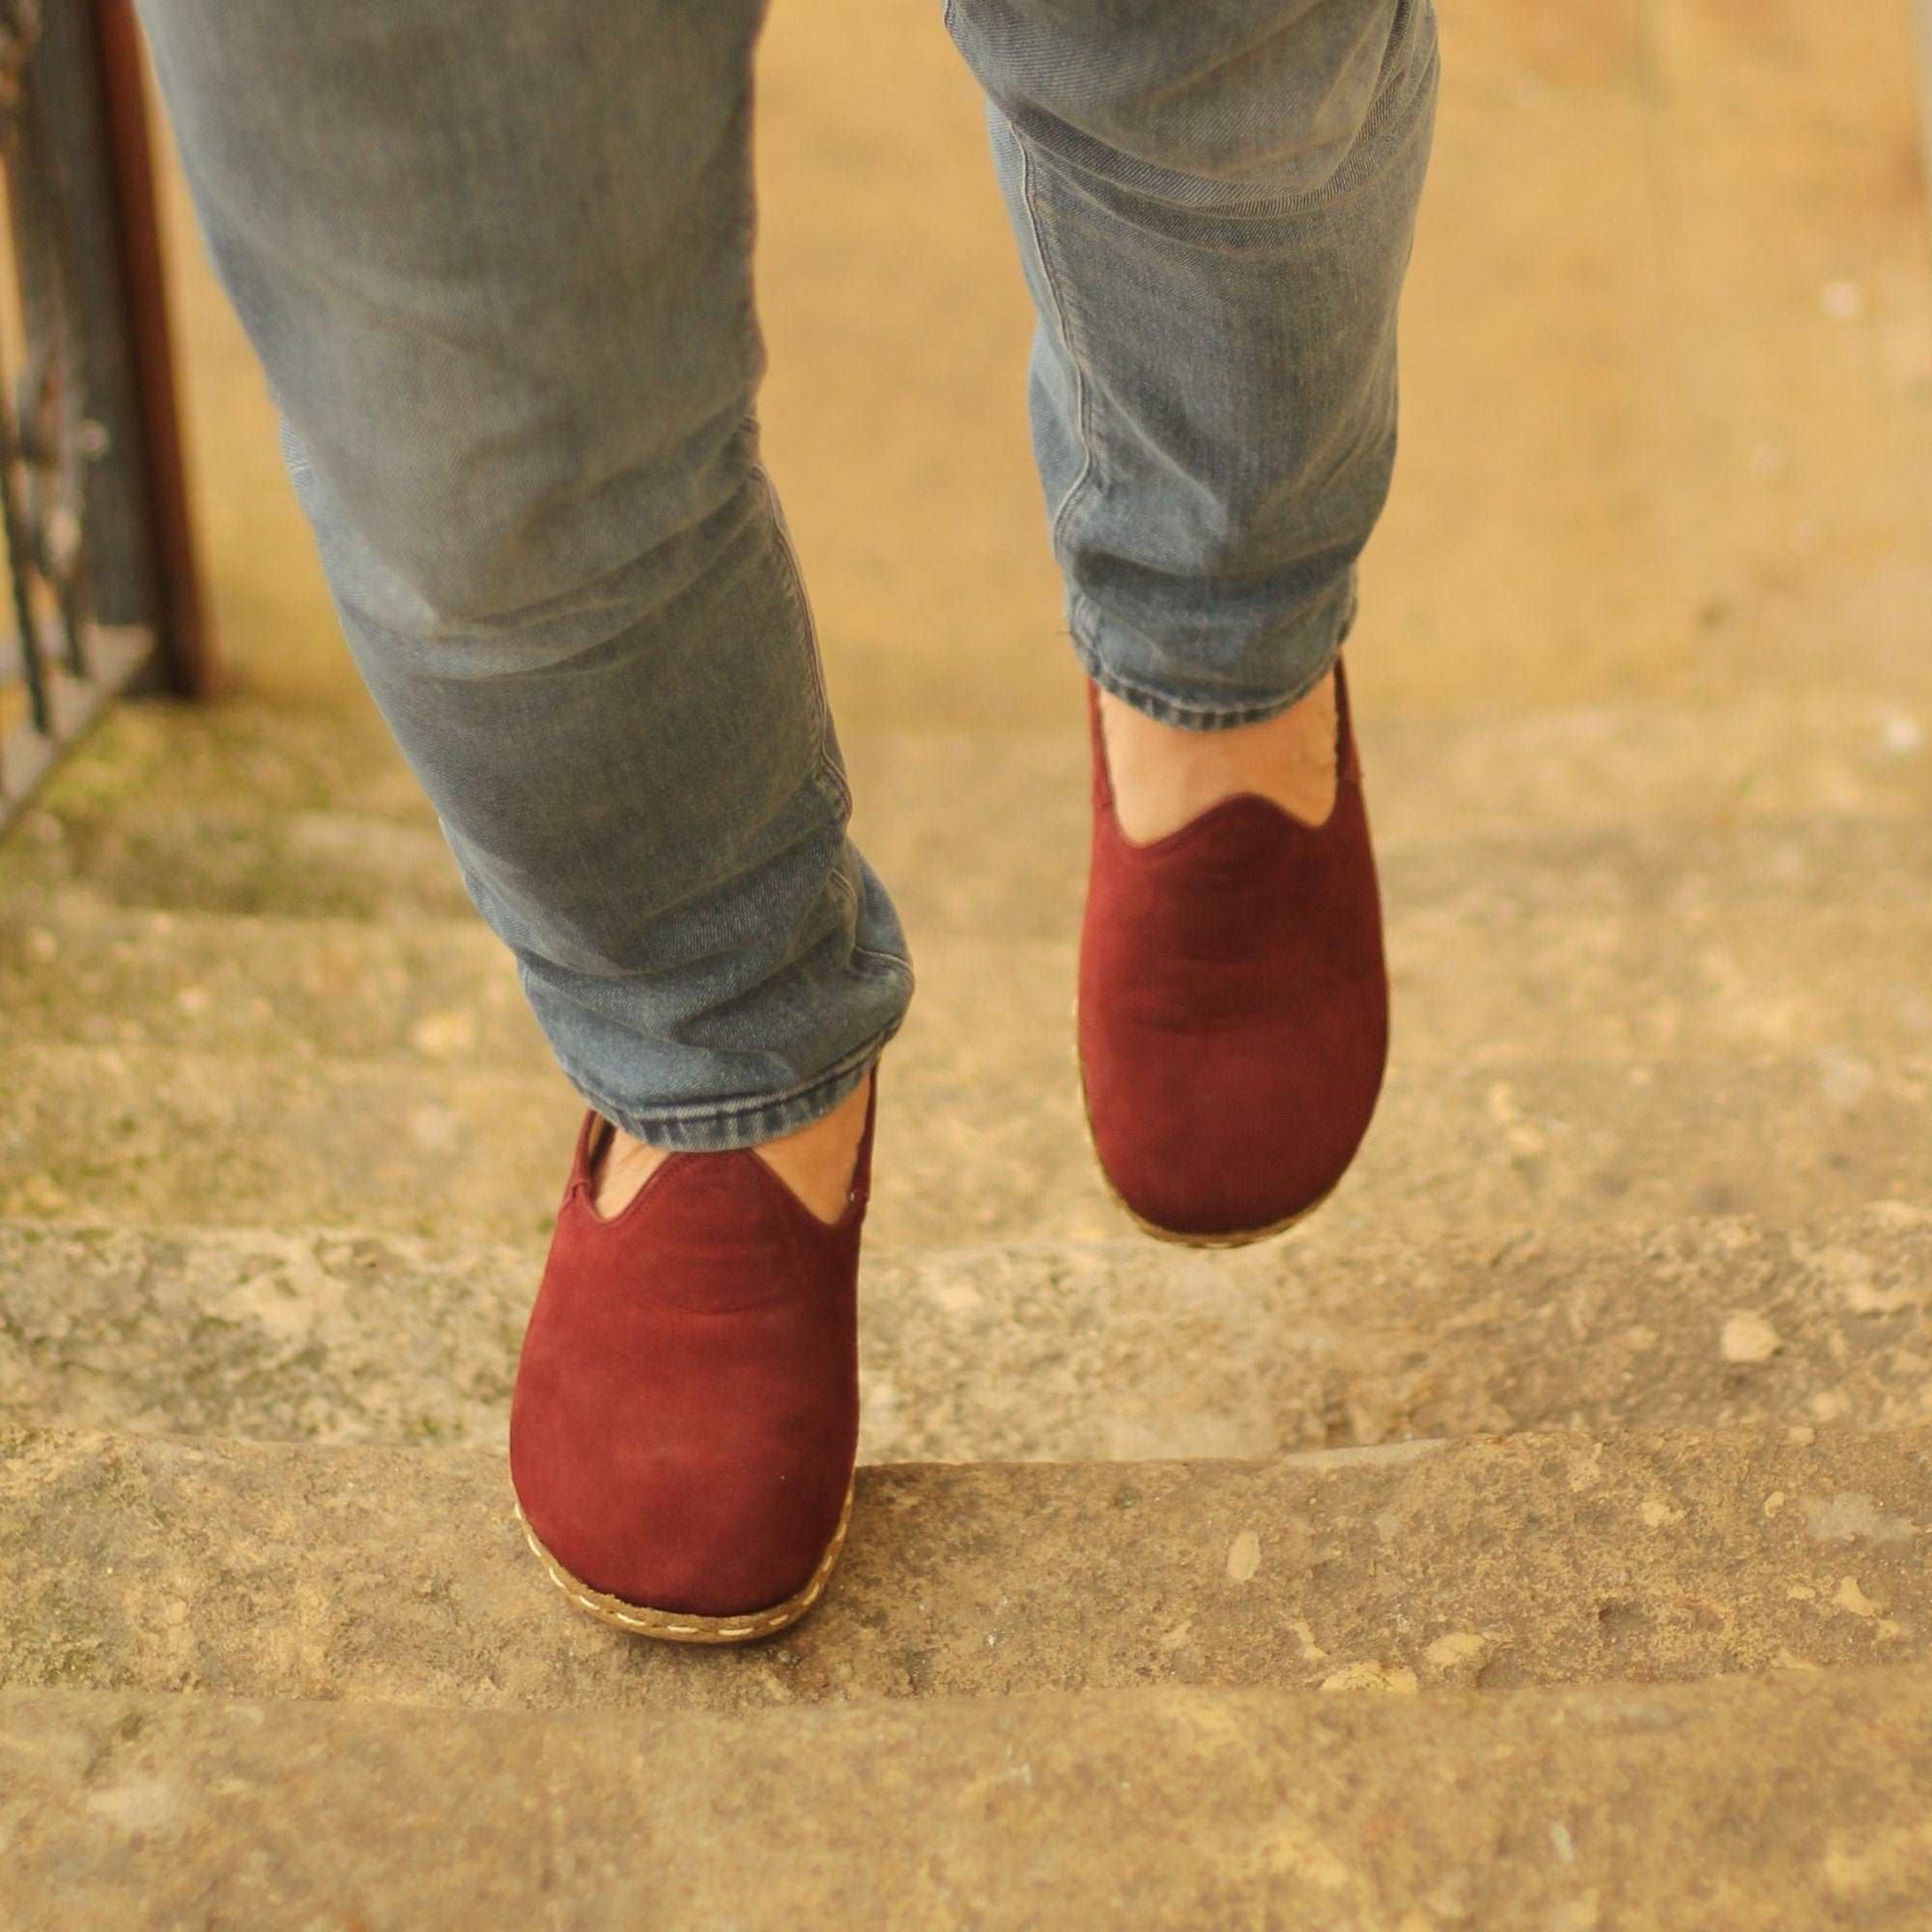 Men's Barefoot Shoes, handmade claret red leather